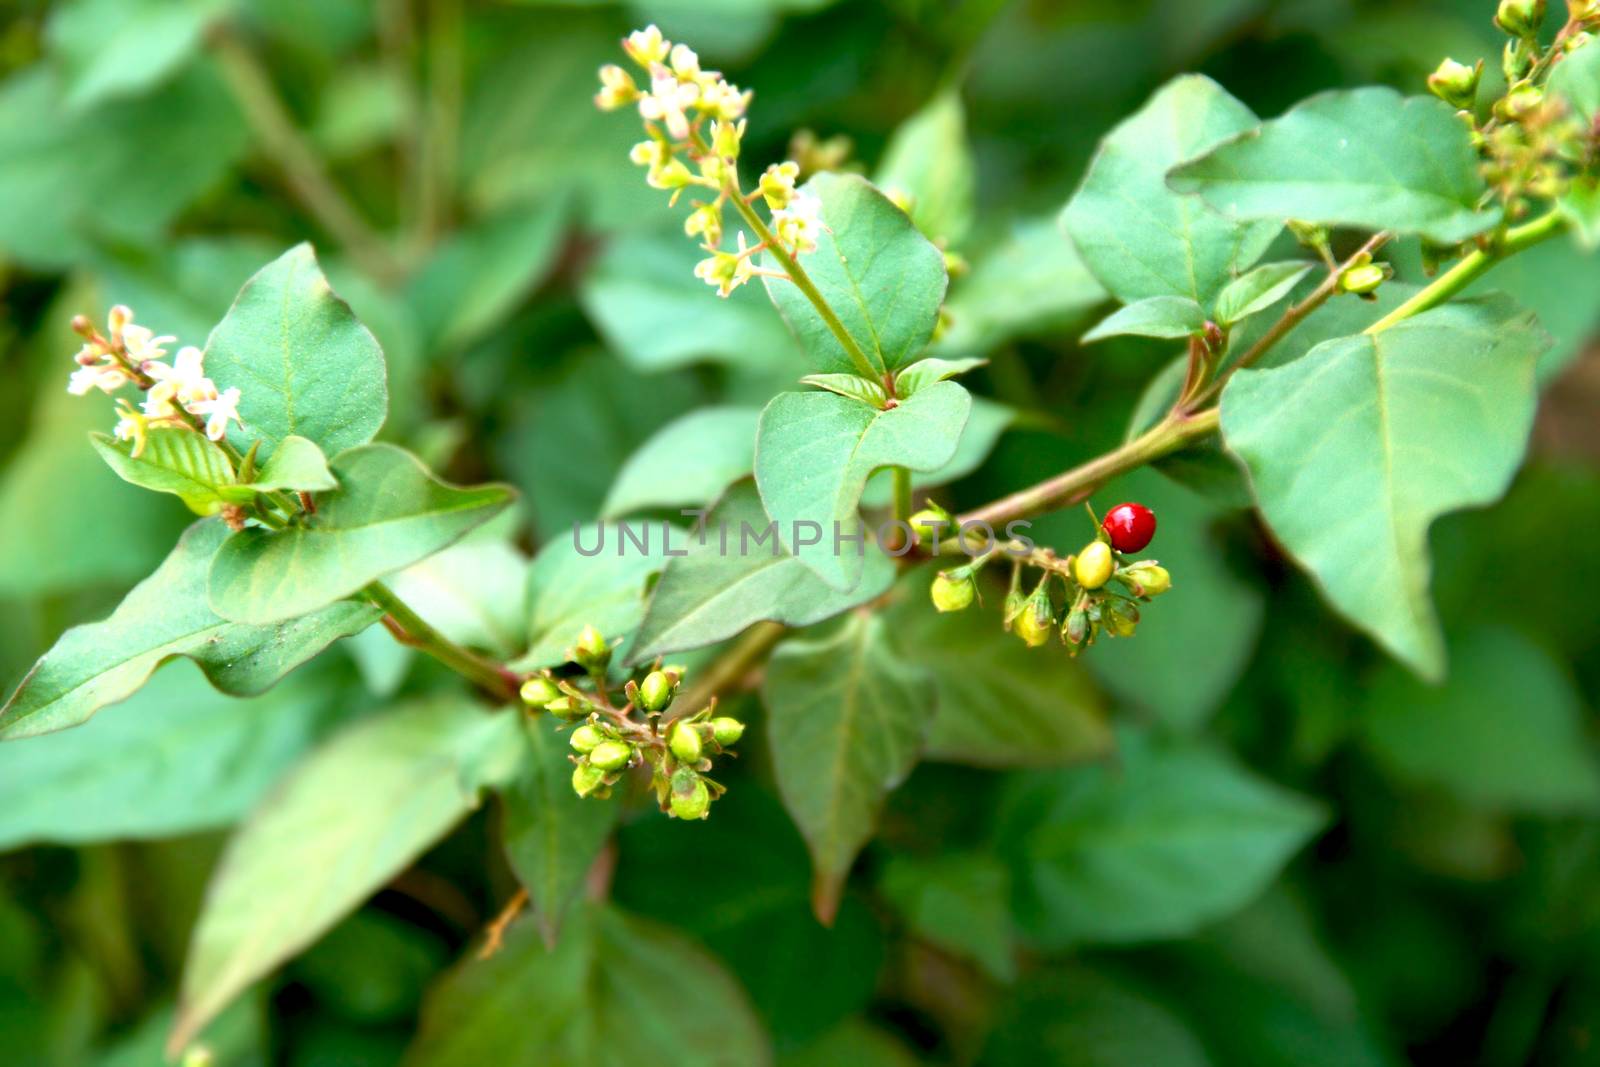 flowering green plant with red berry like balls by stockbp